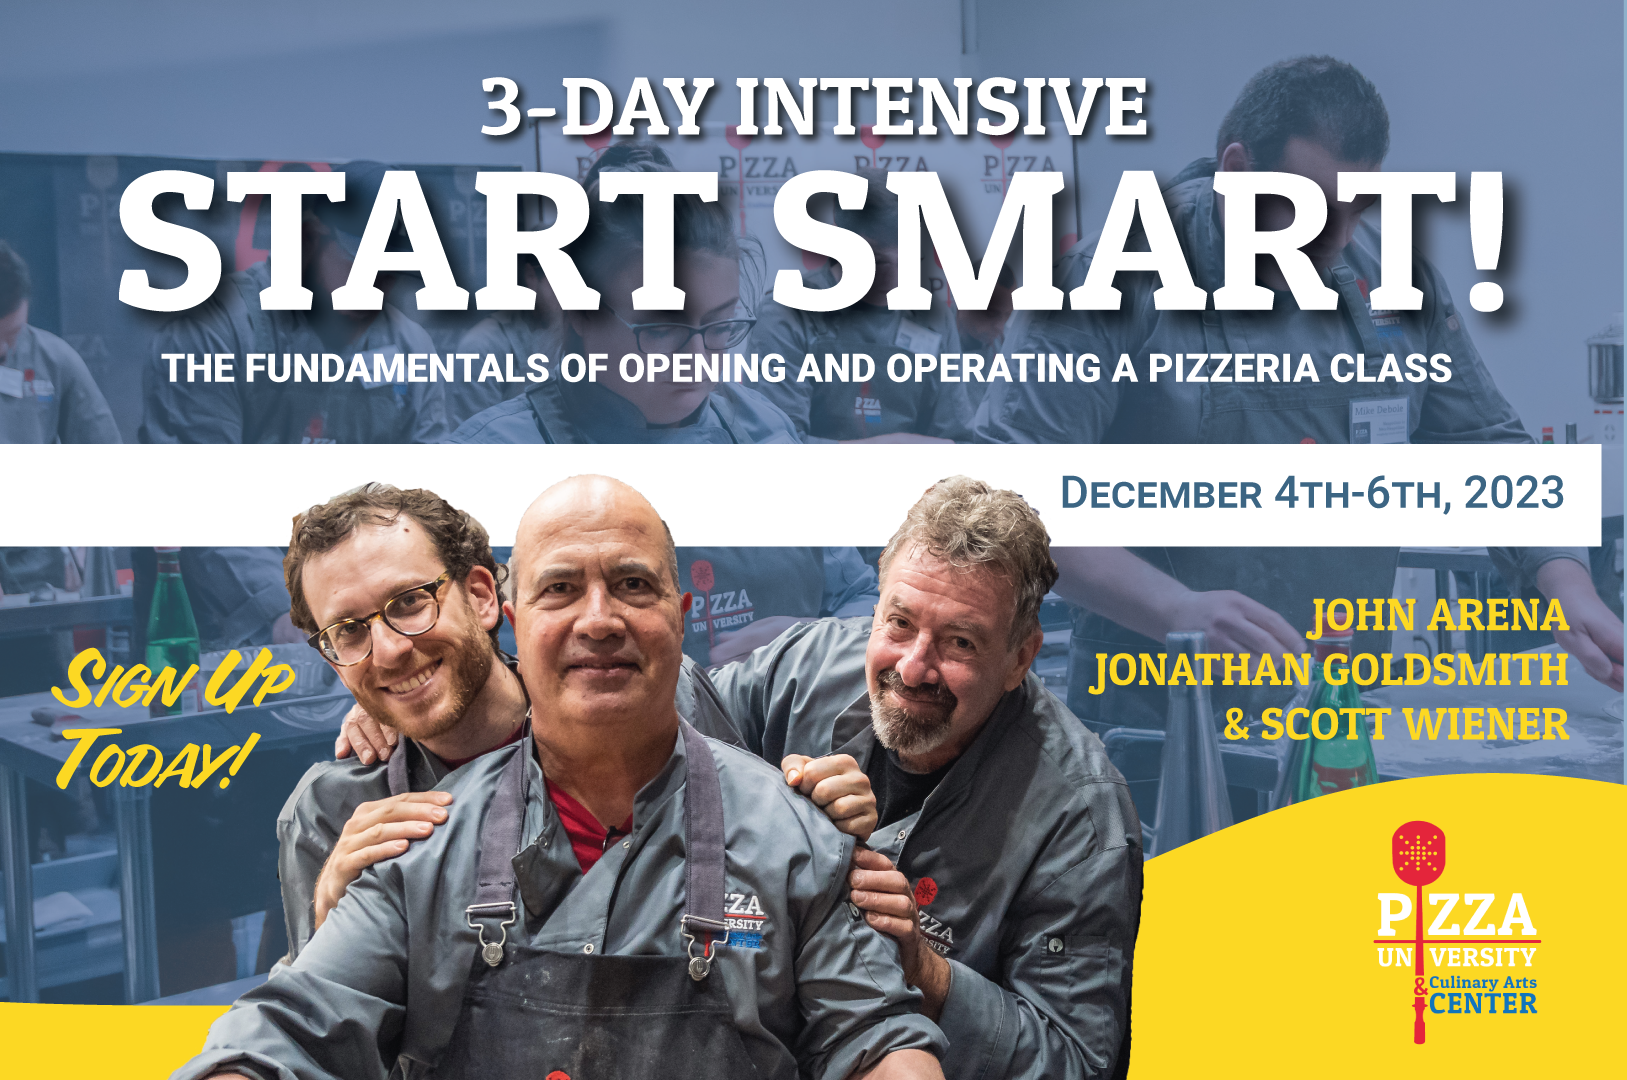 3-Day Intensive “Start Smart! – The Fundamentals of Opening and Operating a Pizzeria” Class with John Arena, Jonathan Goldsmith and Scott Wiener